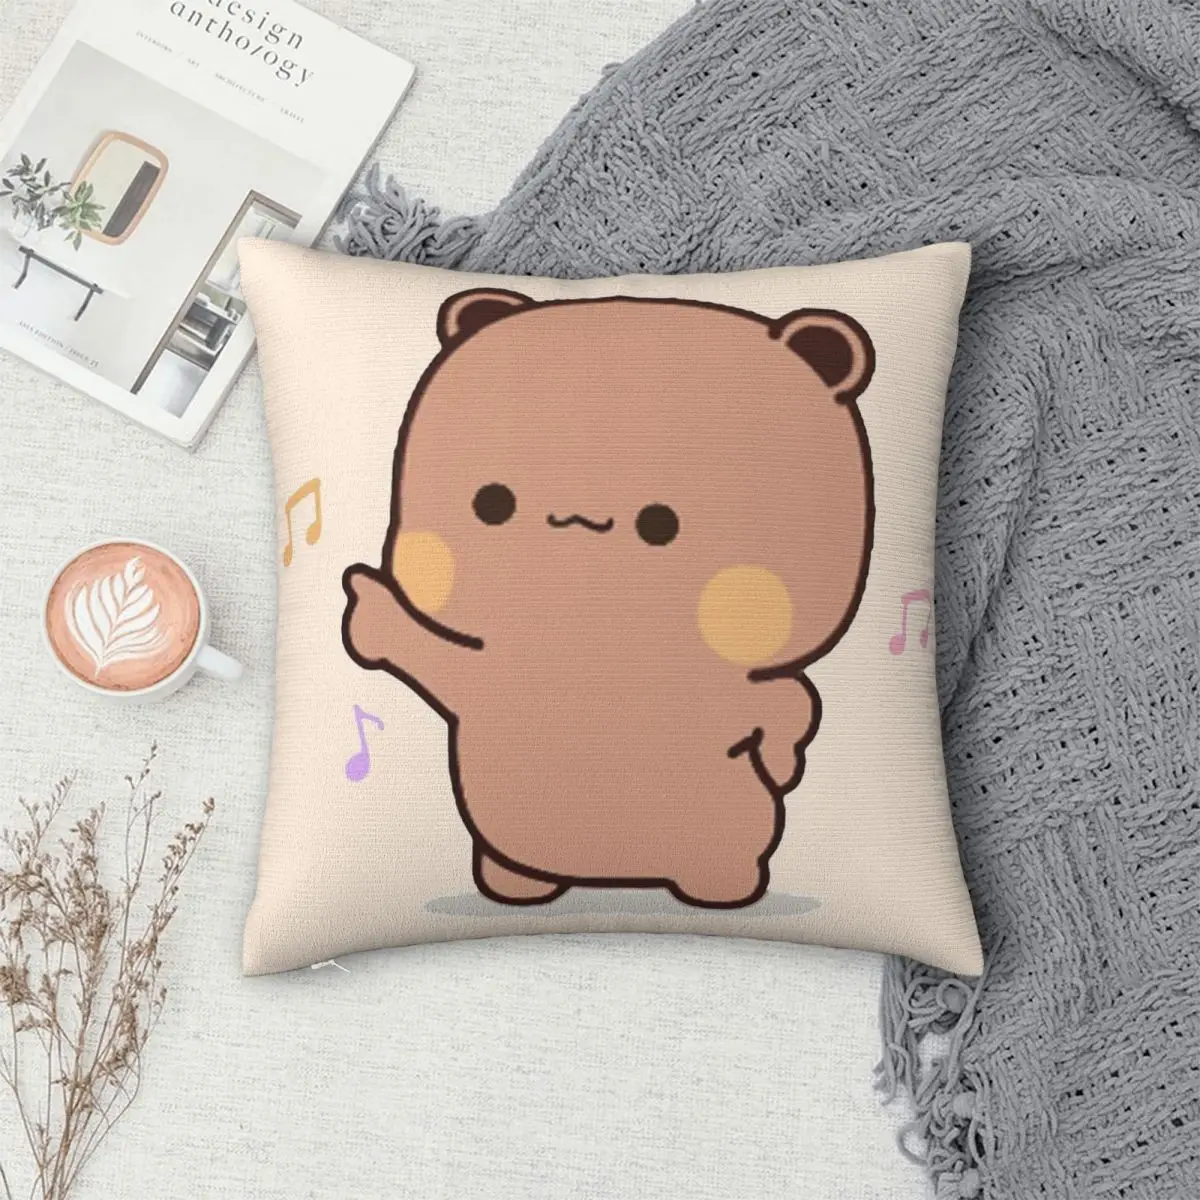 

Panda And Brownie Bear Couple Pillowcase Polyester Pillows Cover Cushion Comfort Throw Pillow Sofa Decorative Cushions Used